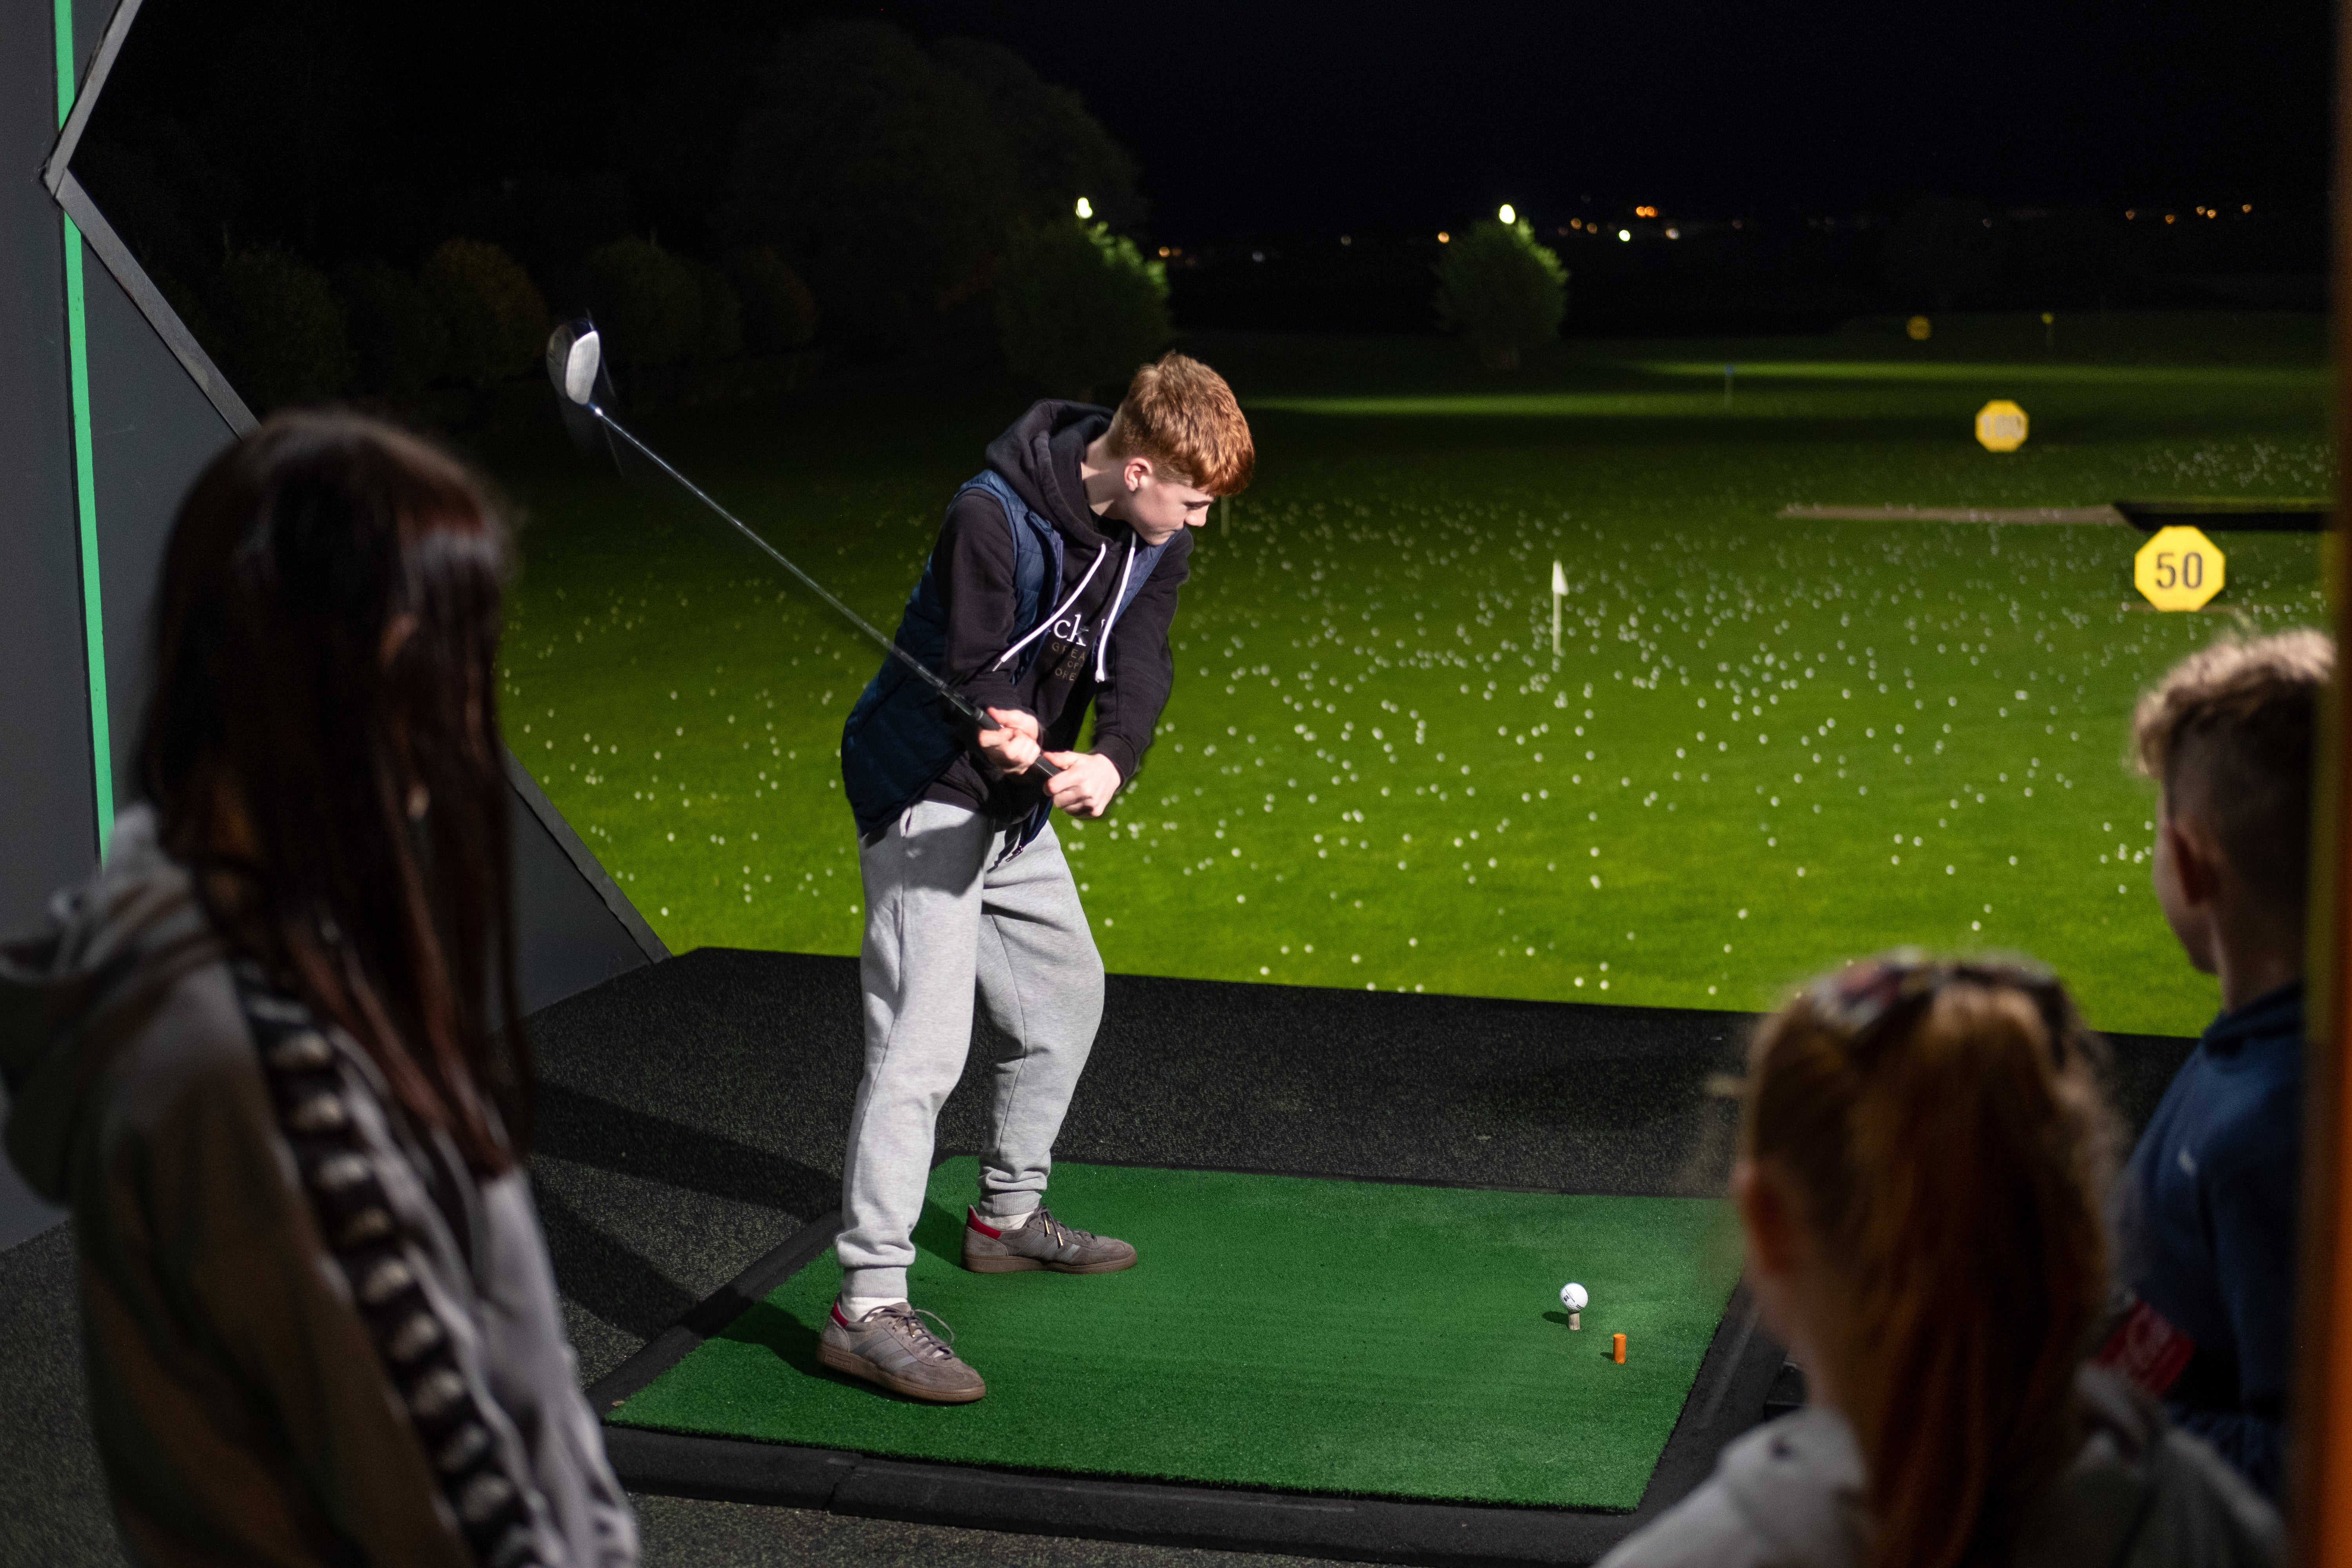 Target Golf • Portable Golf Game and Driving Range